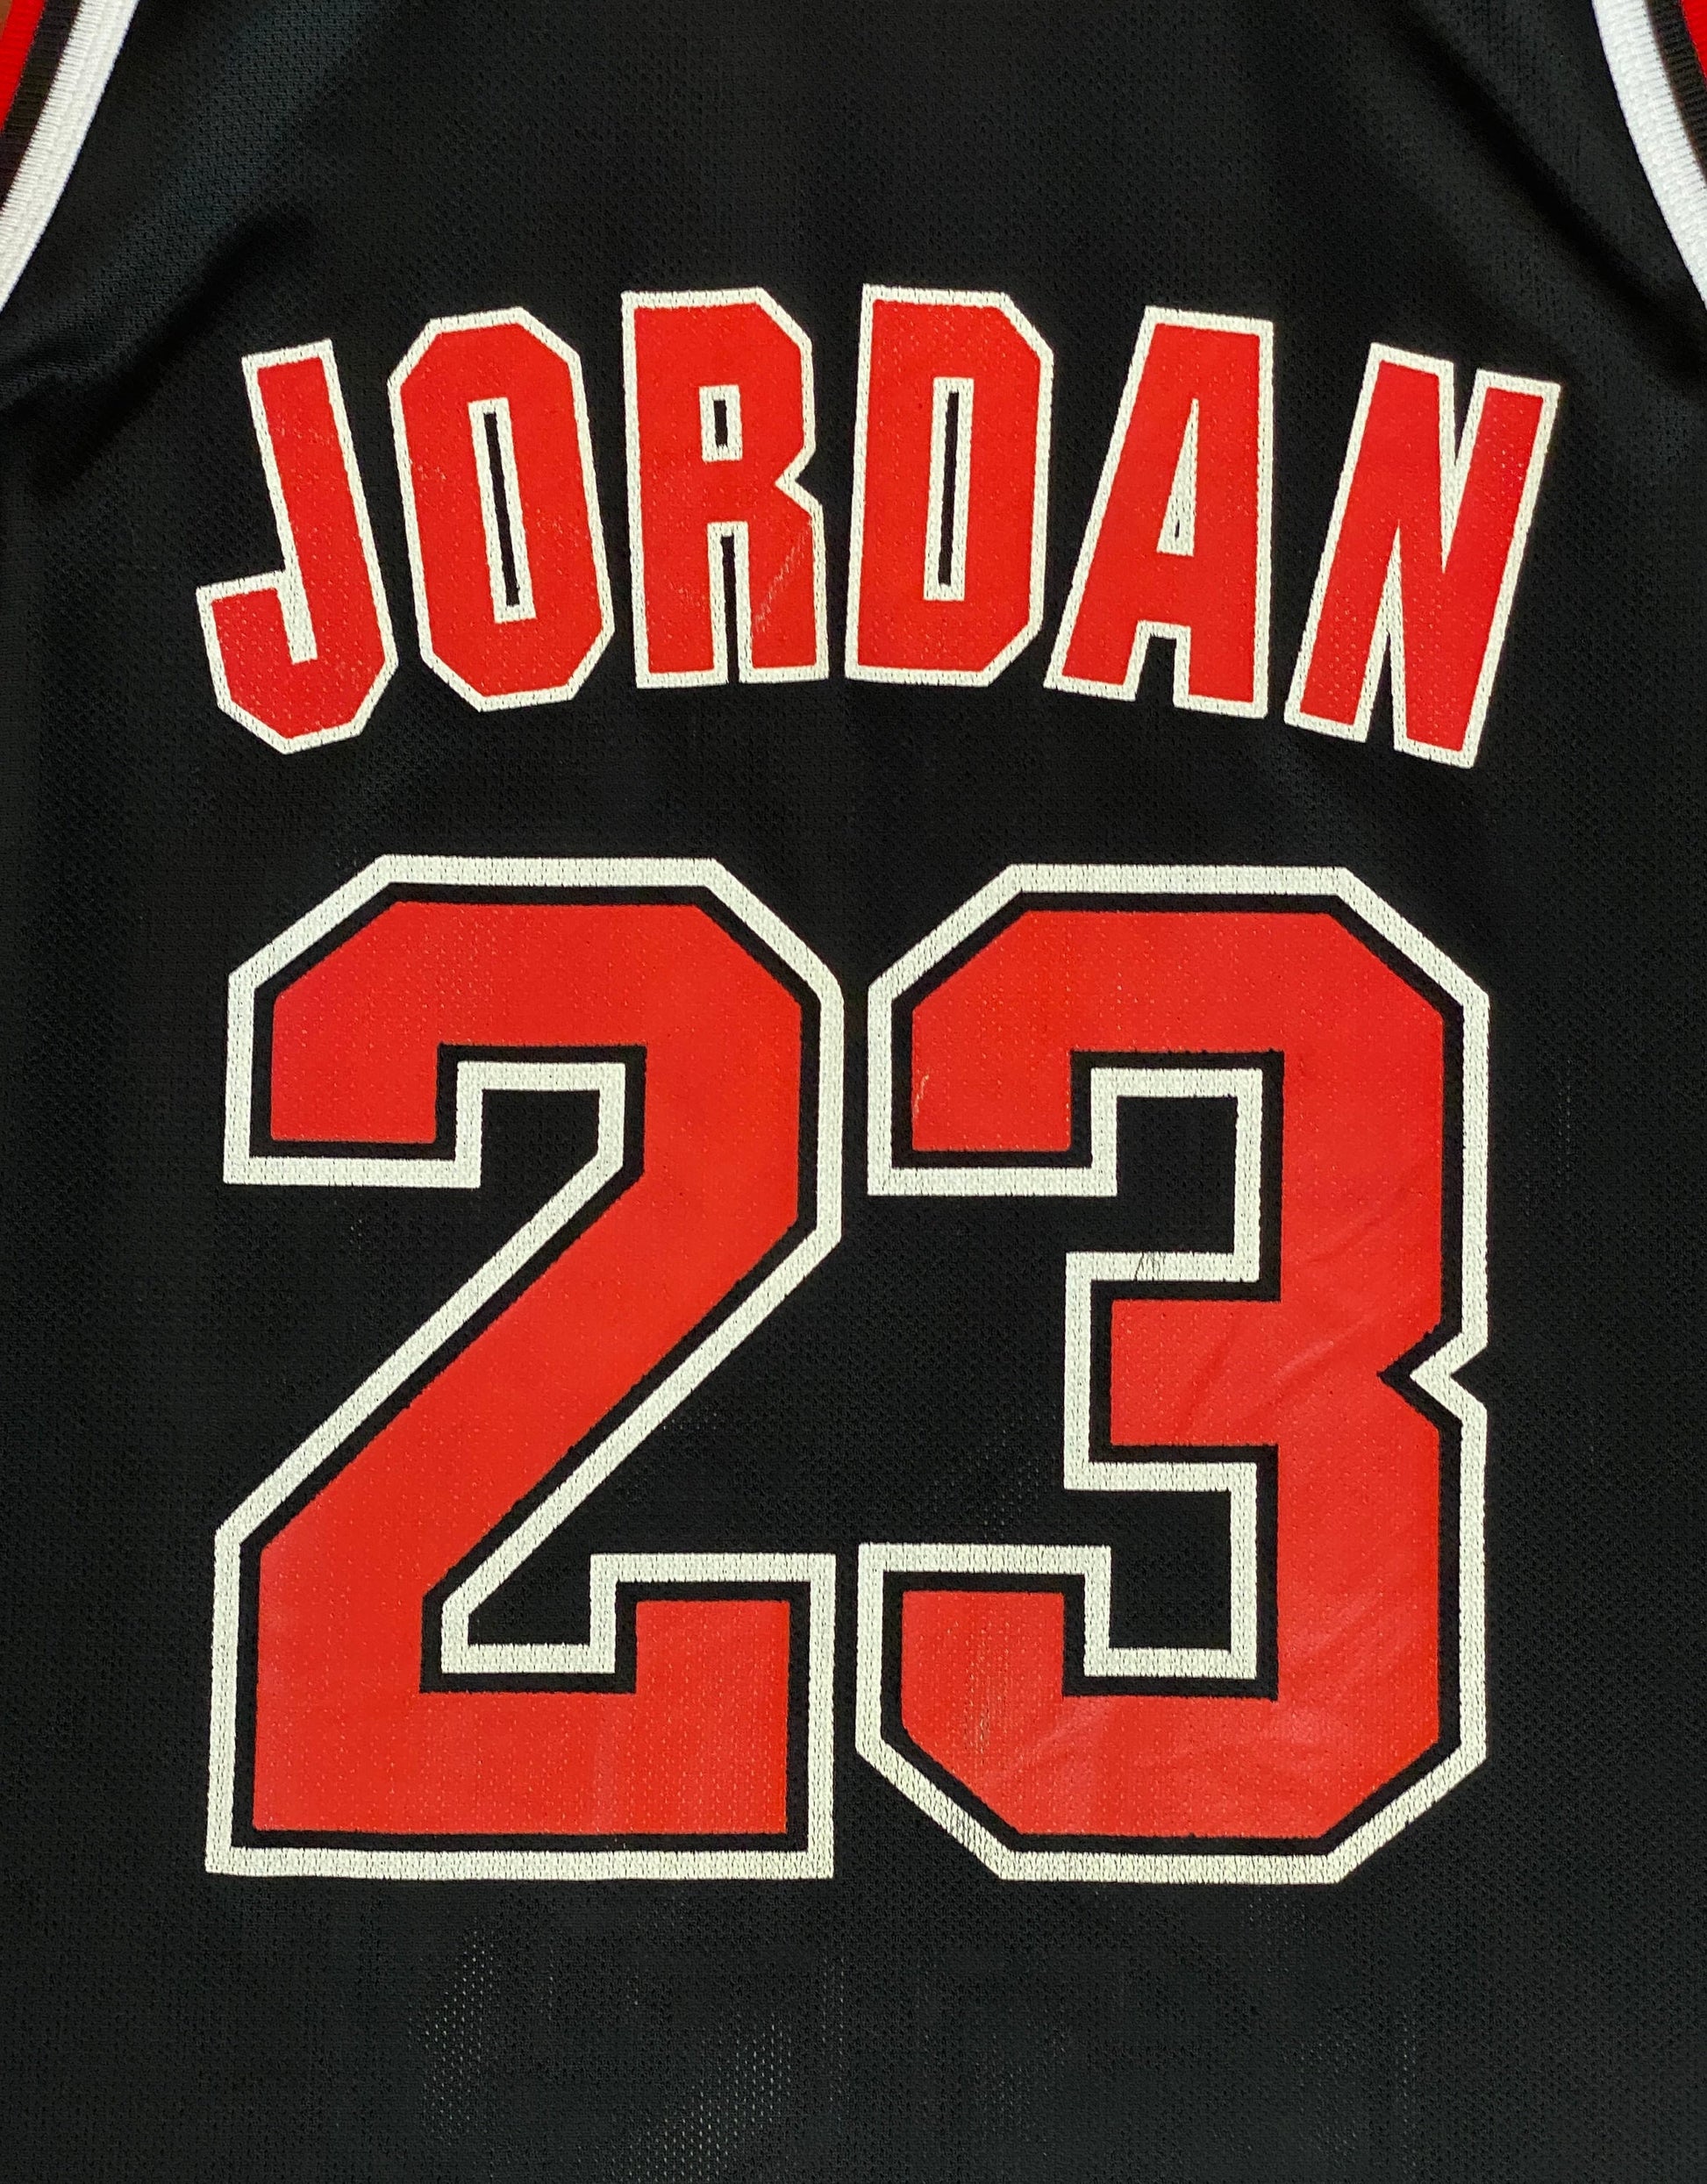 Vintage 90s NBA Chicago Bulls Michael Jordan #23 jersey, size 44 - back view. Made in USA by Champion.